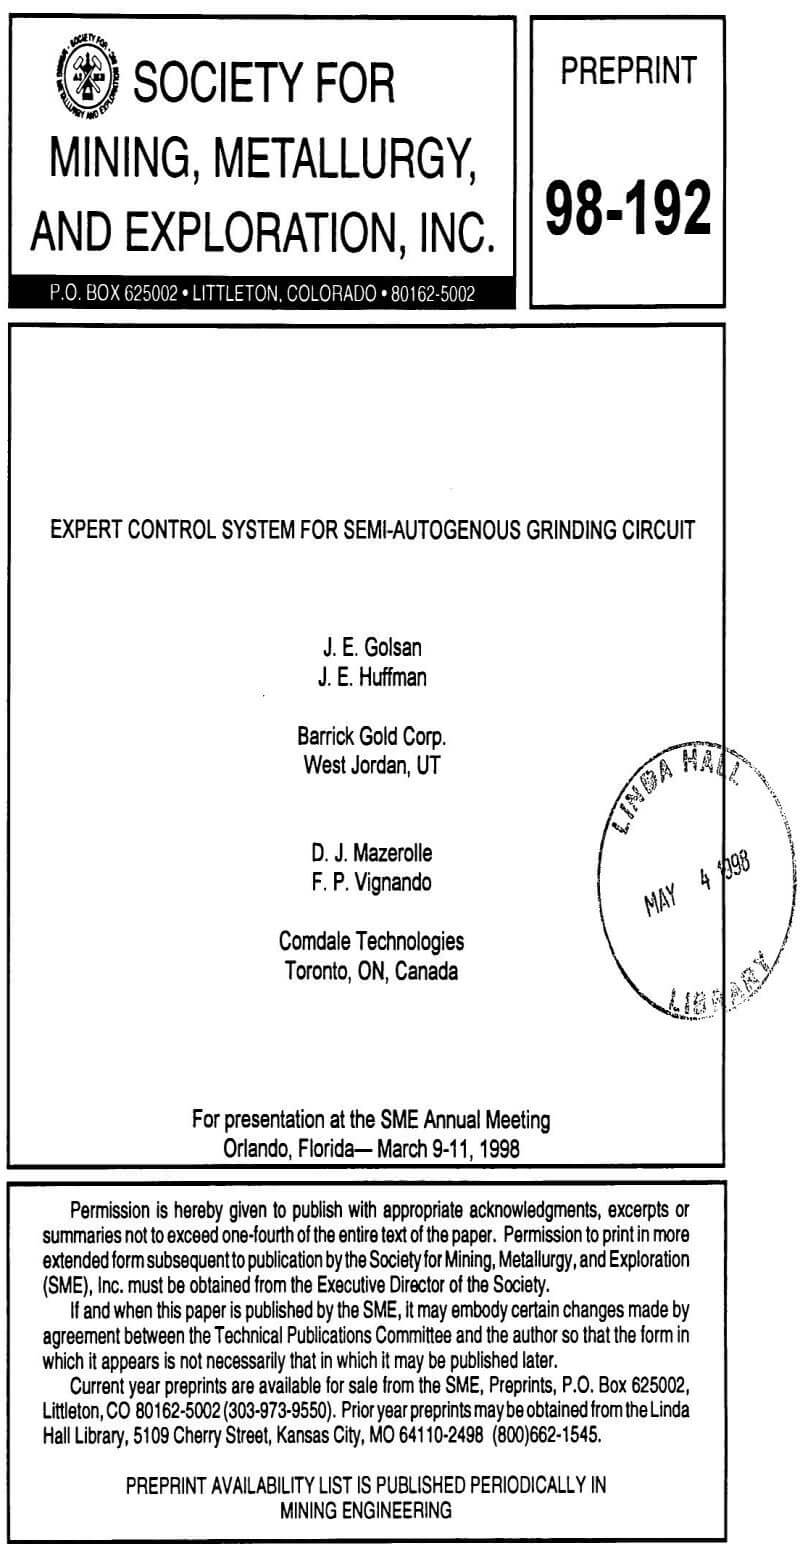 expert control system for semi-autogenous grinding circuit